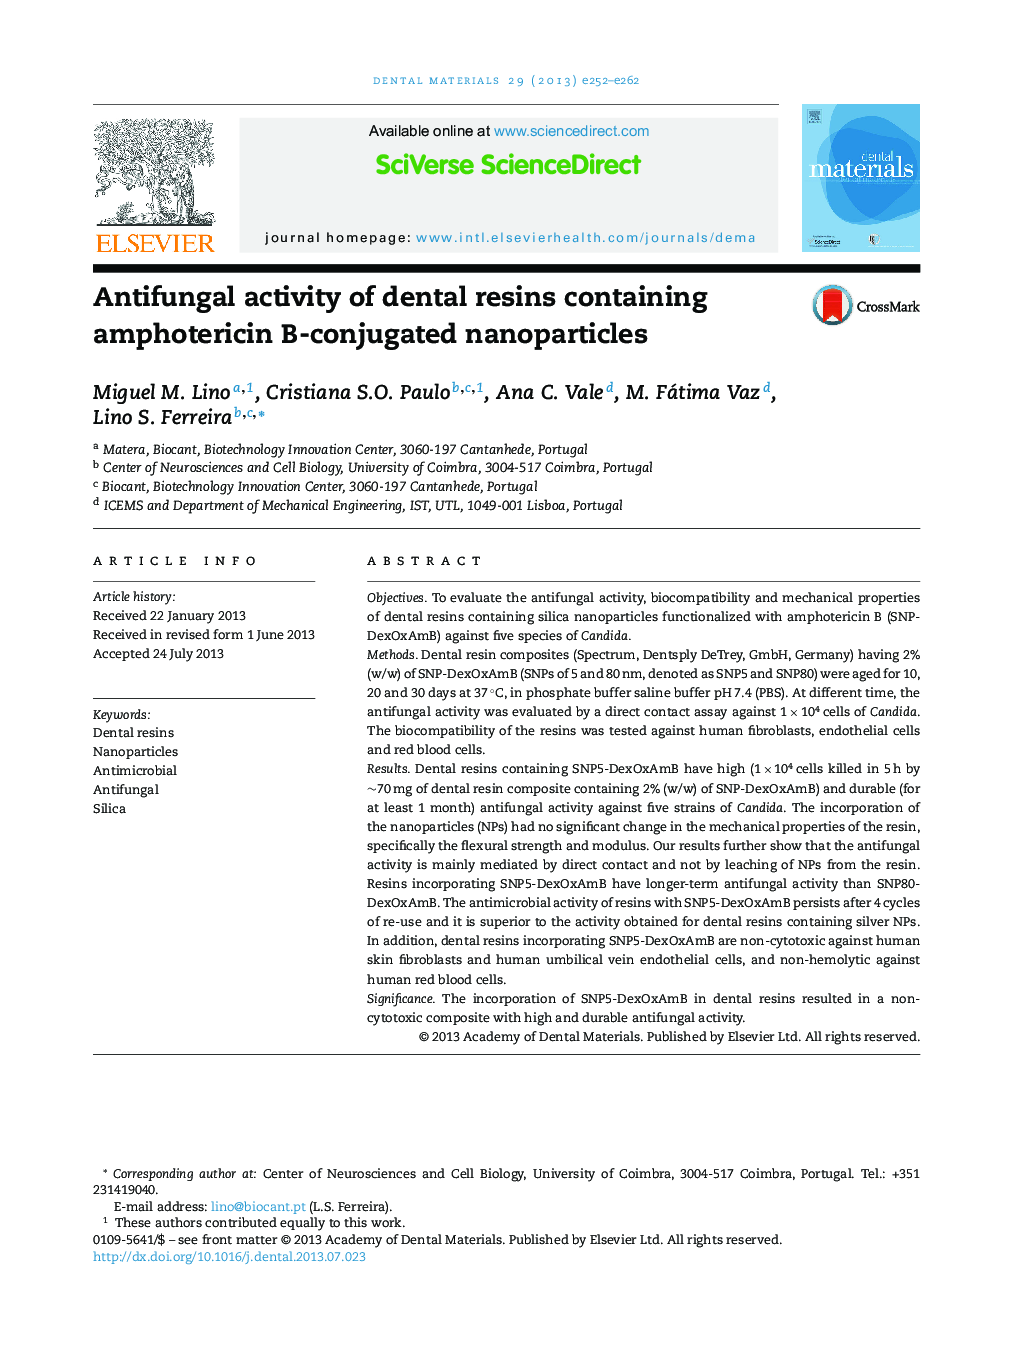 Antifungal activity of dental resins containing amphotericin B-conjugated nanoparticles